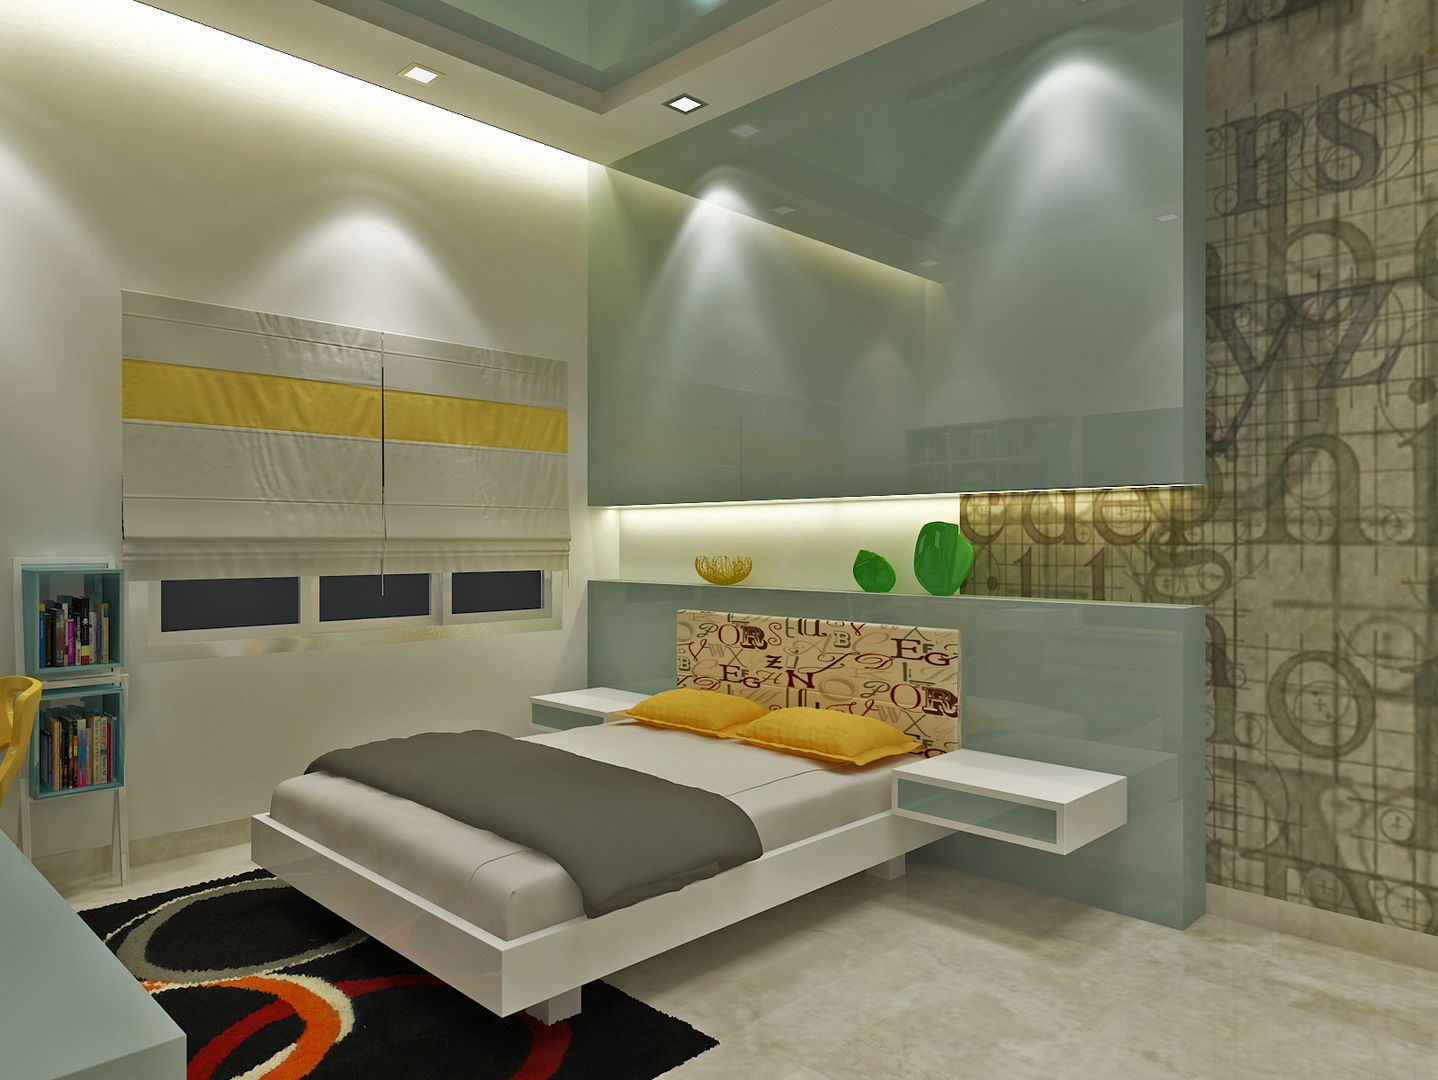 A Simple Children's Room With Simple & Attractive Designs. Vasantha Architects and Interior Designers (VAID)